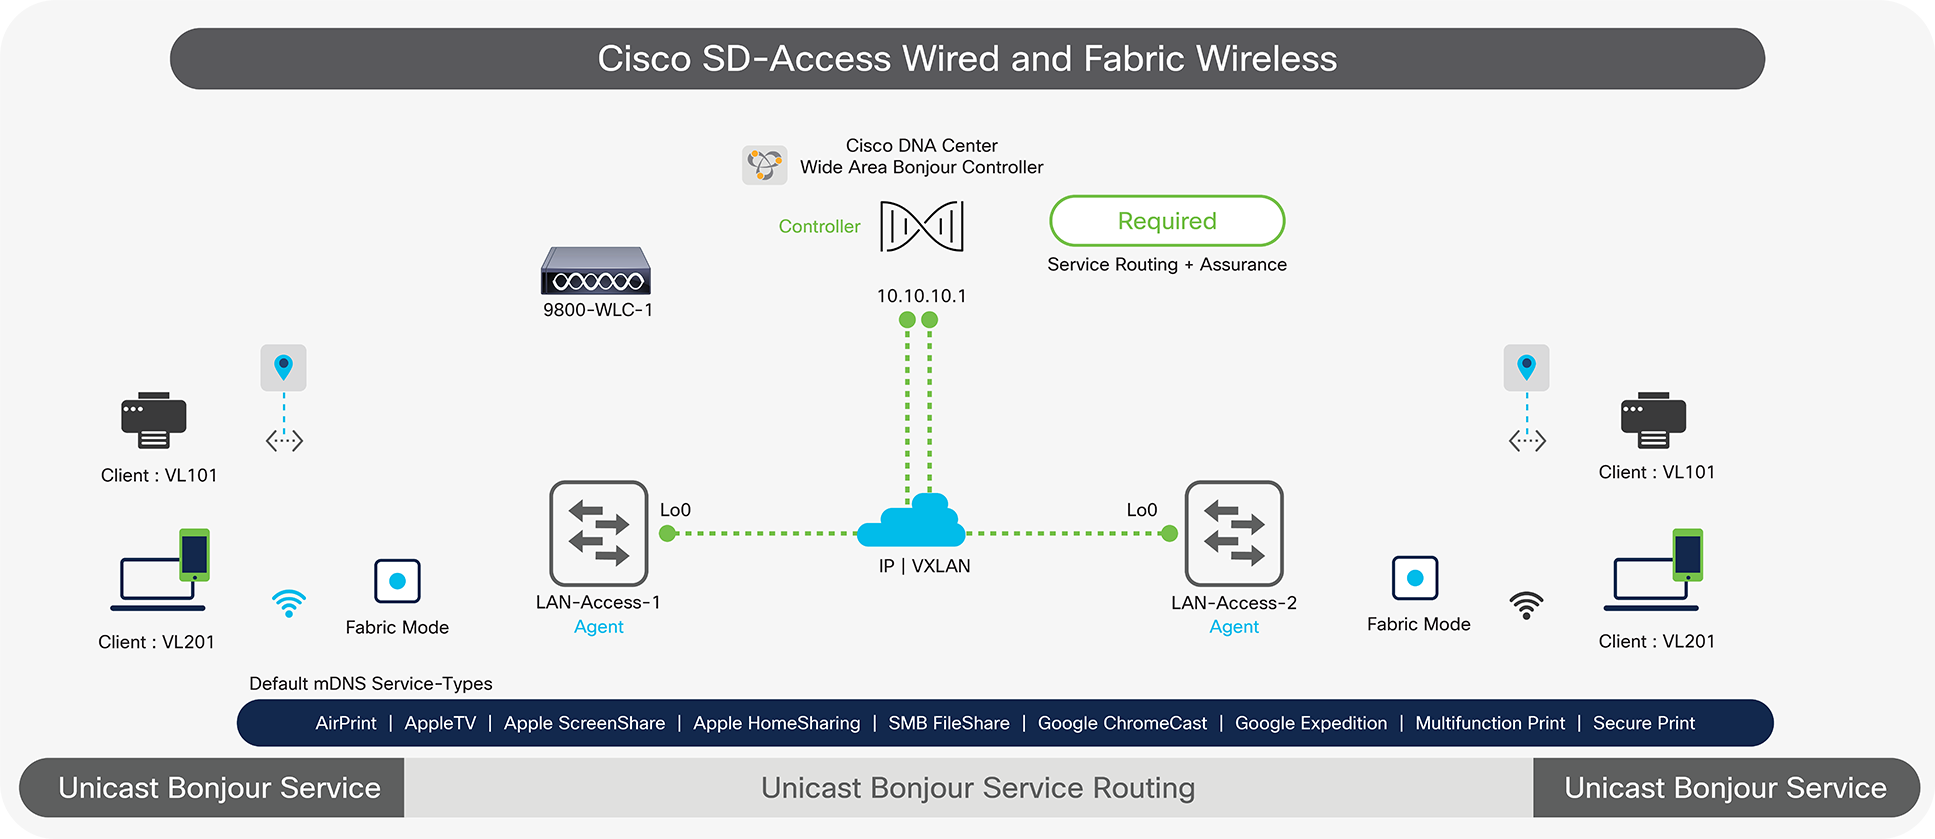 Wide Area Bonjour for Cisco SD-Access Wired and Wireless